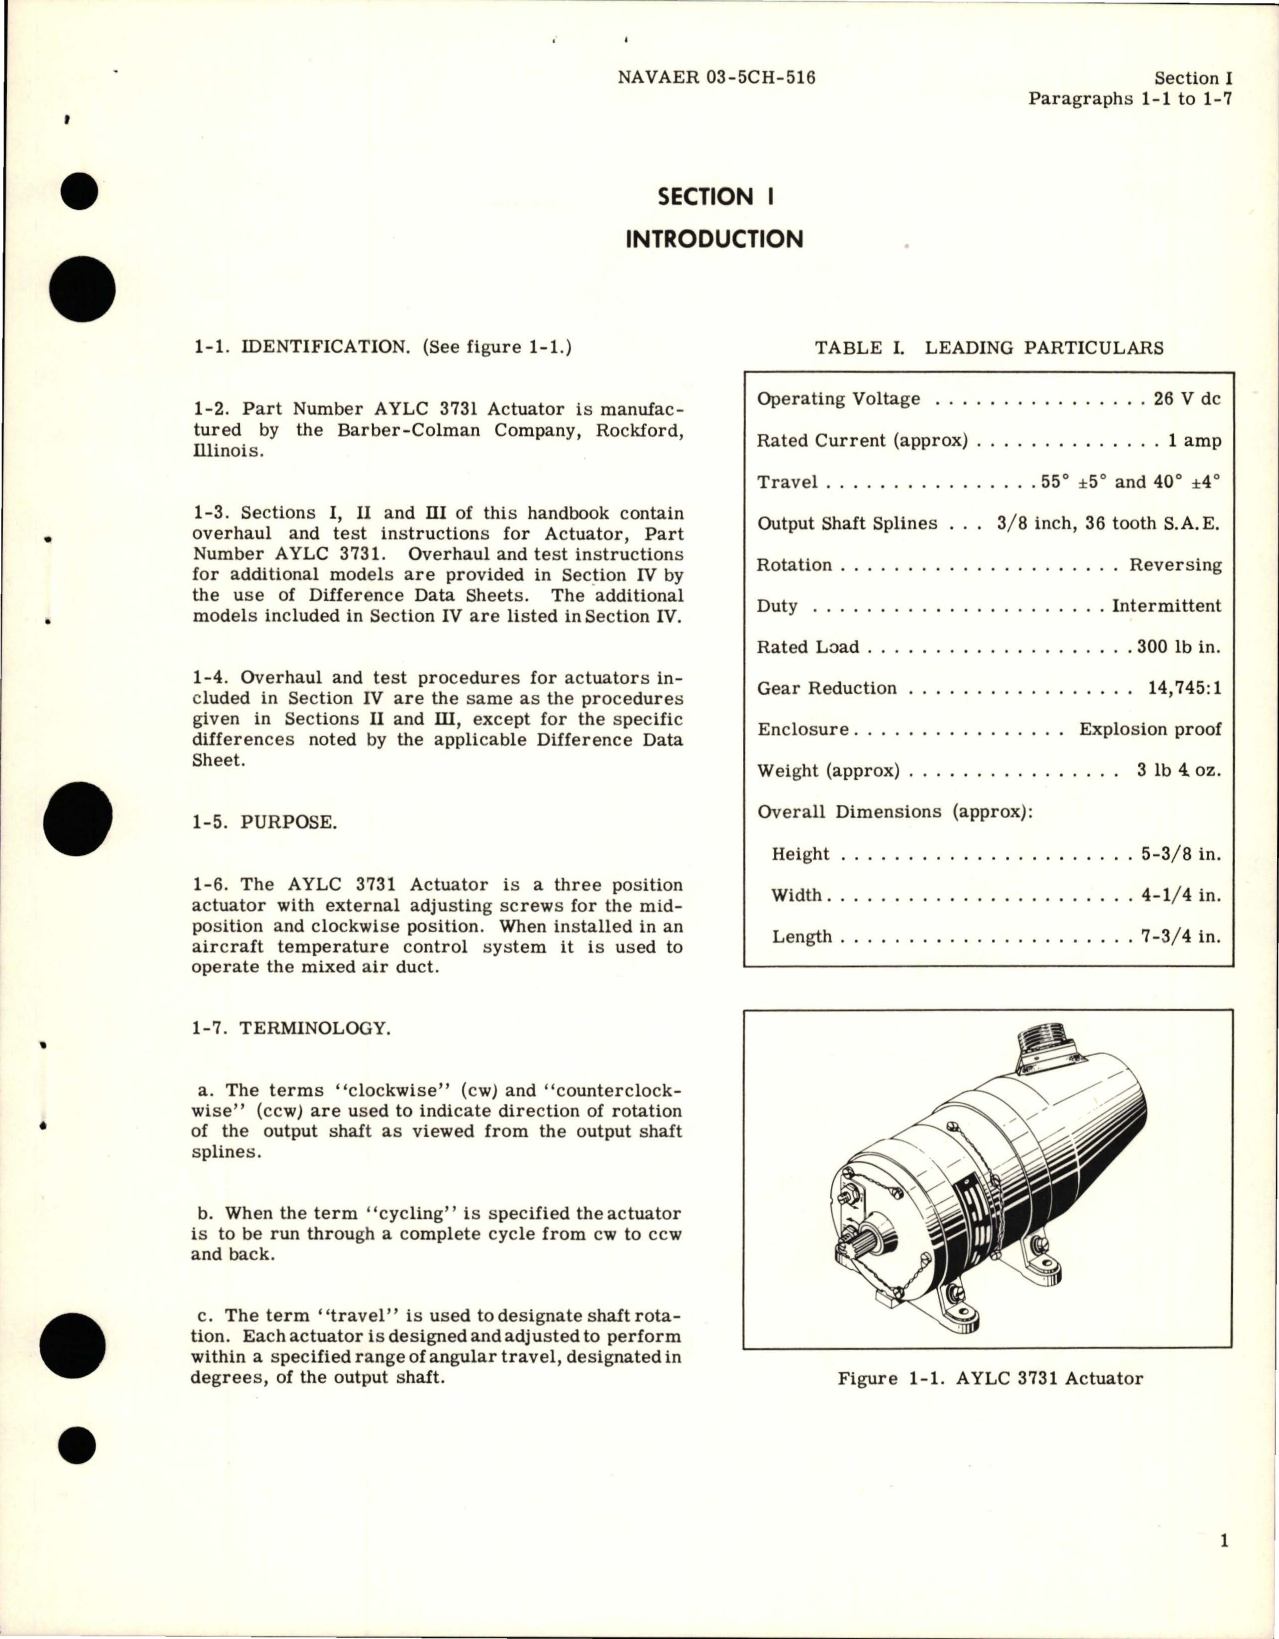 Sample page 5 from AirCorps Library document: Overhaul Instructions for Actuators - Parts AYLC 3731 and AYLC 2557